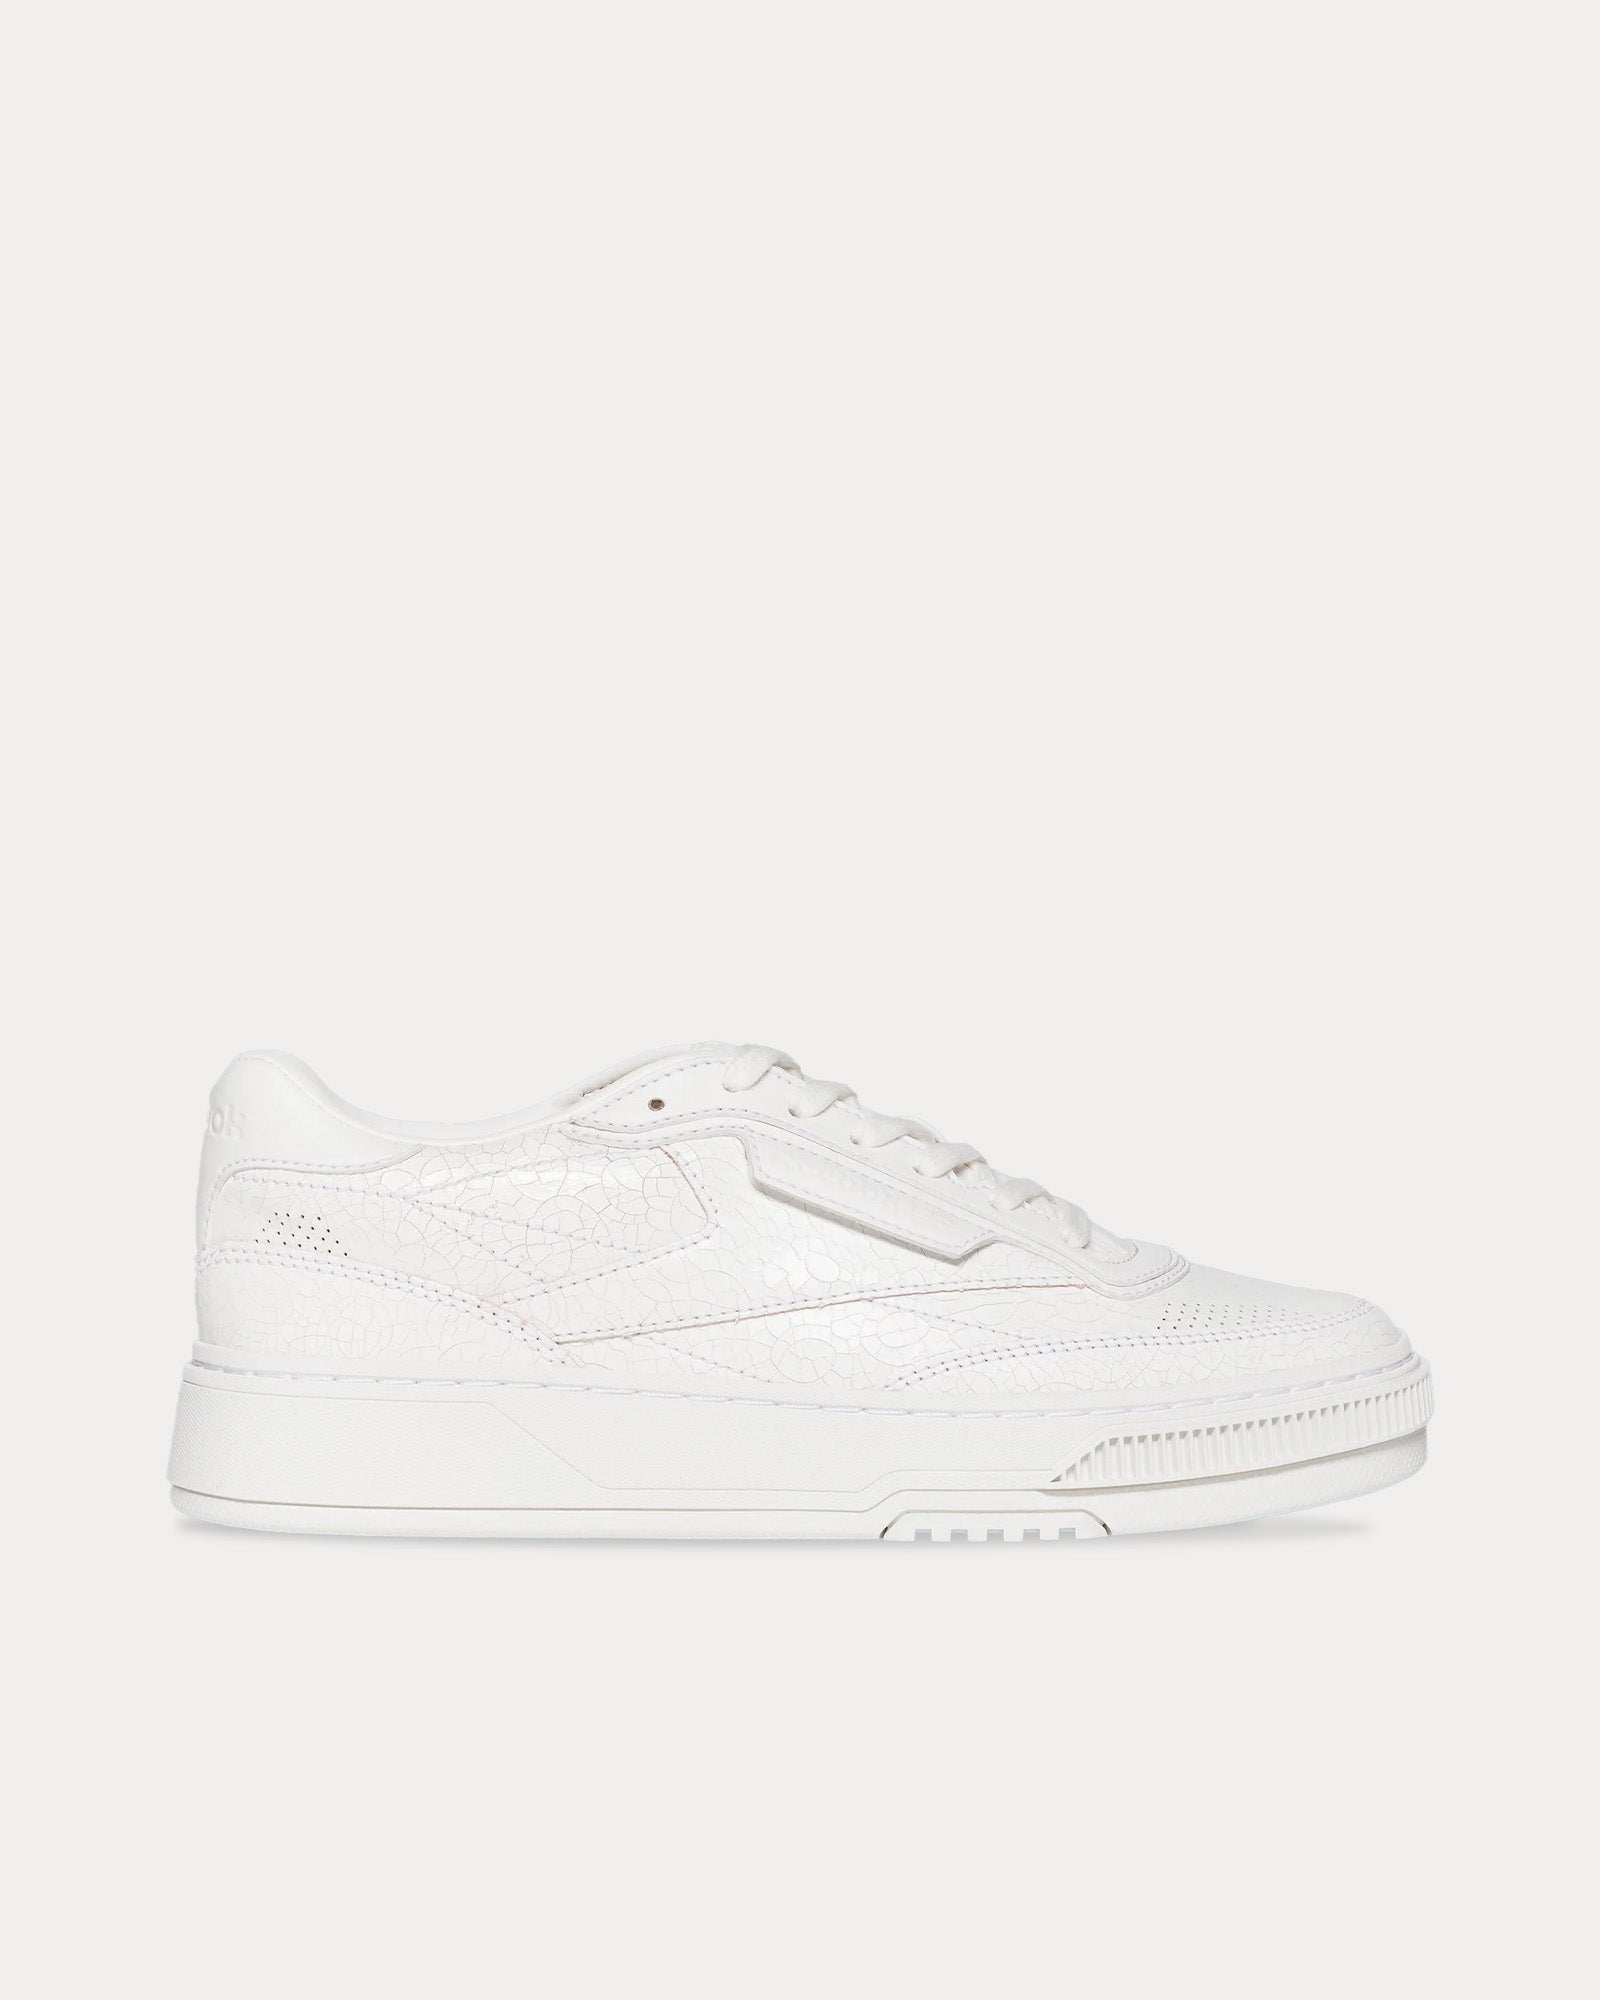 Reebok LTD - Club C Cracked Leather Off-White Low Top Sneakers